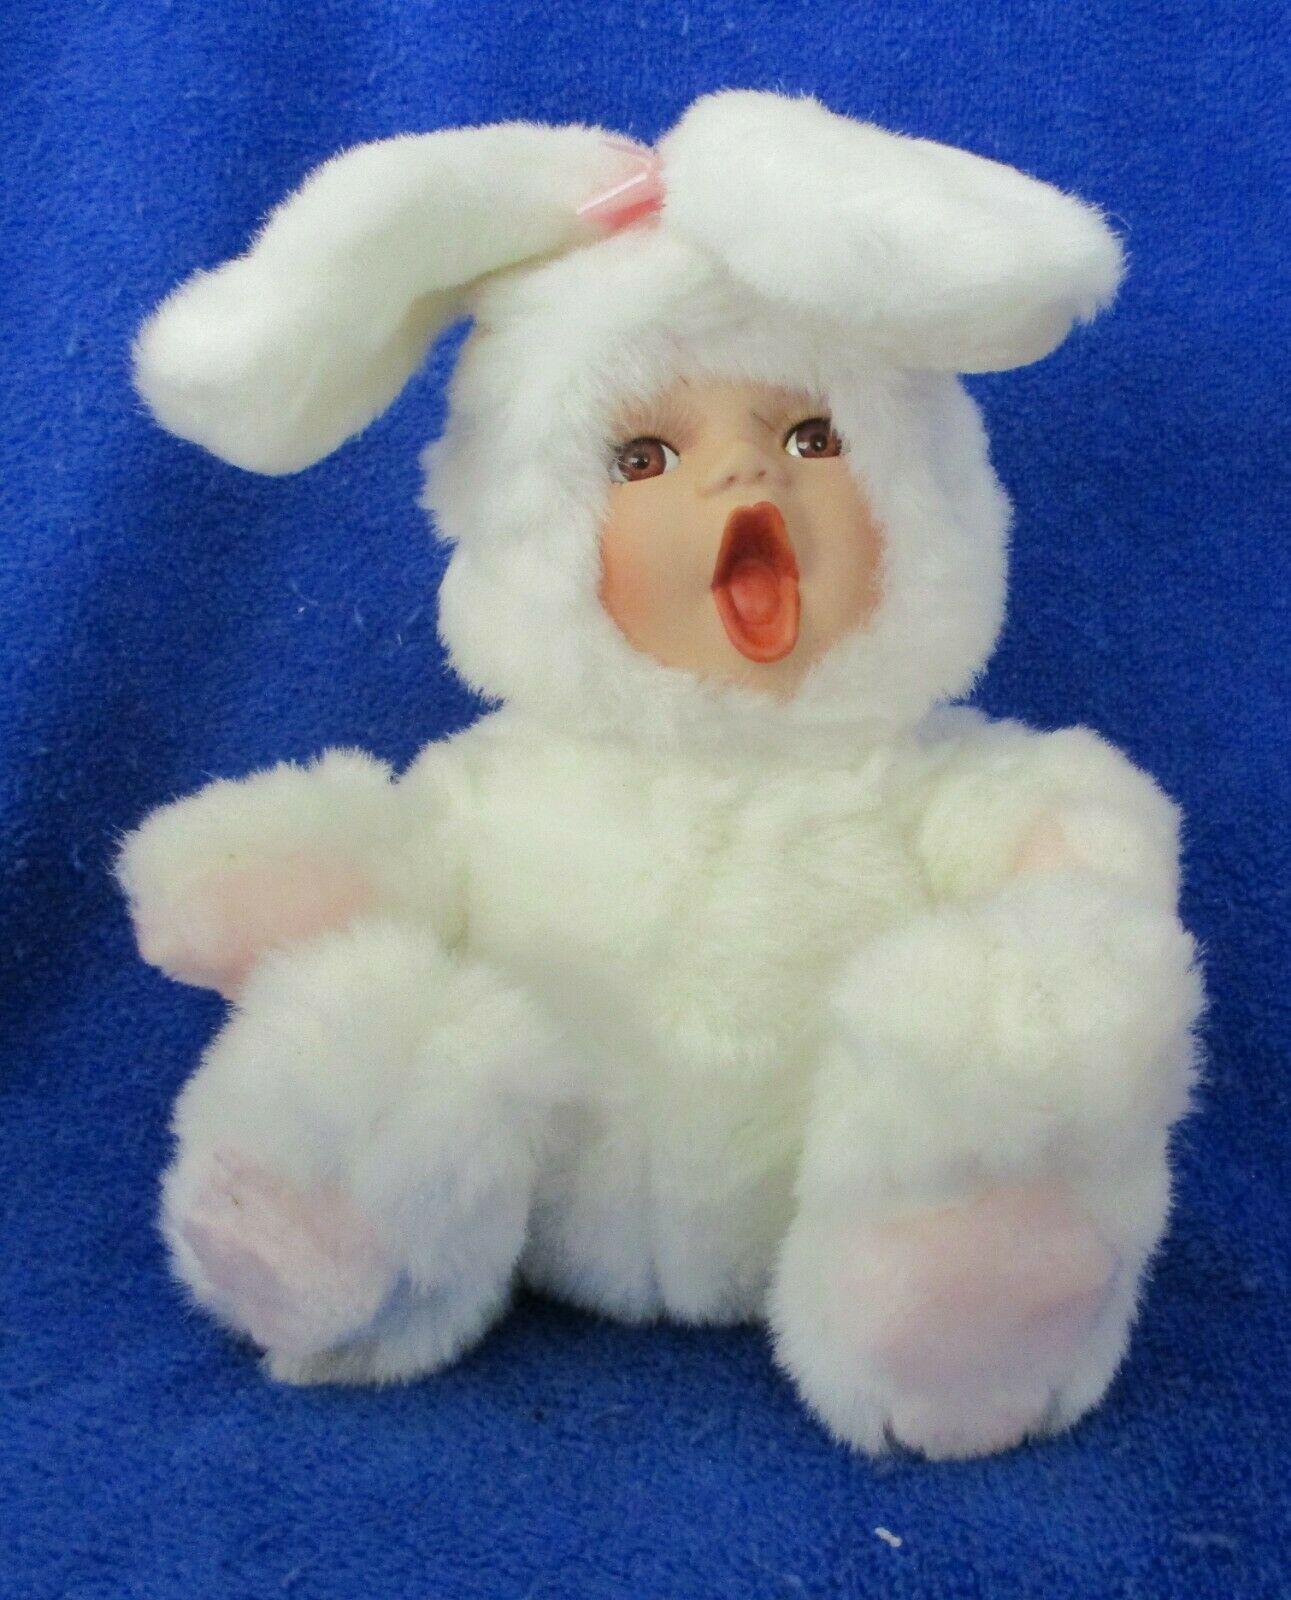 Porcelain Faced Yawning Bunny Doll by Oriental Trading Ages 8+ - $25.24